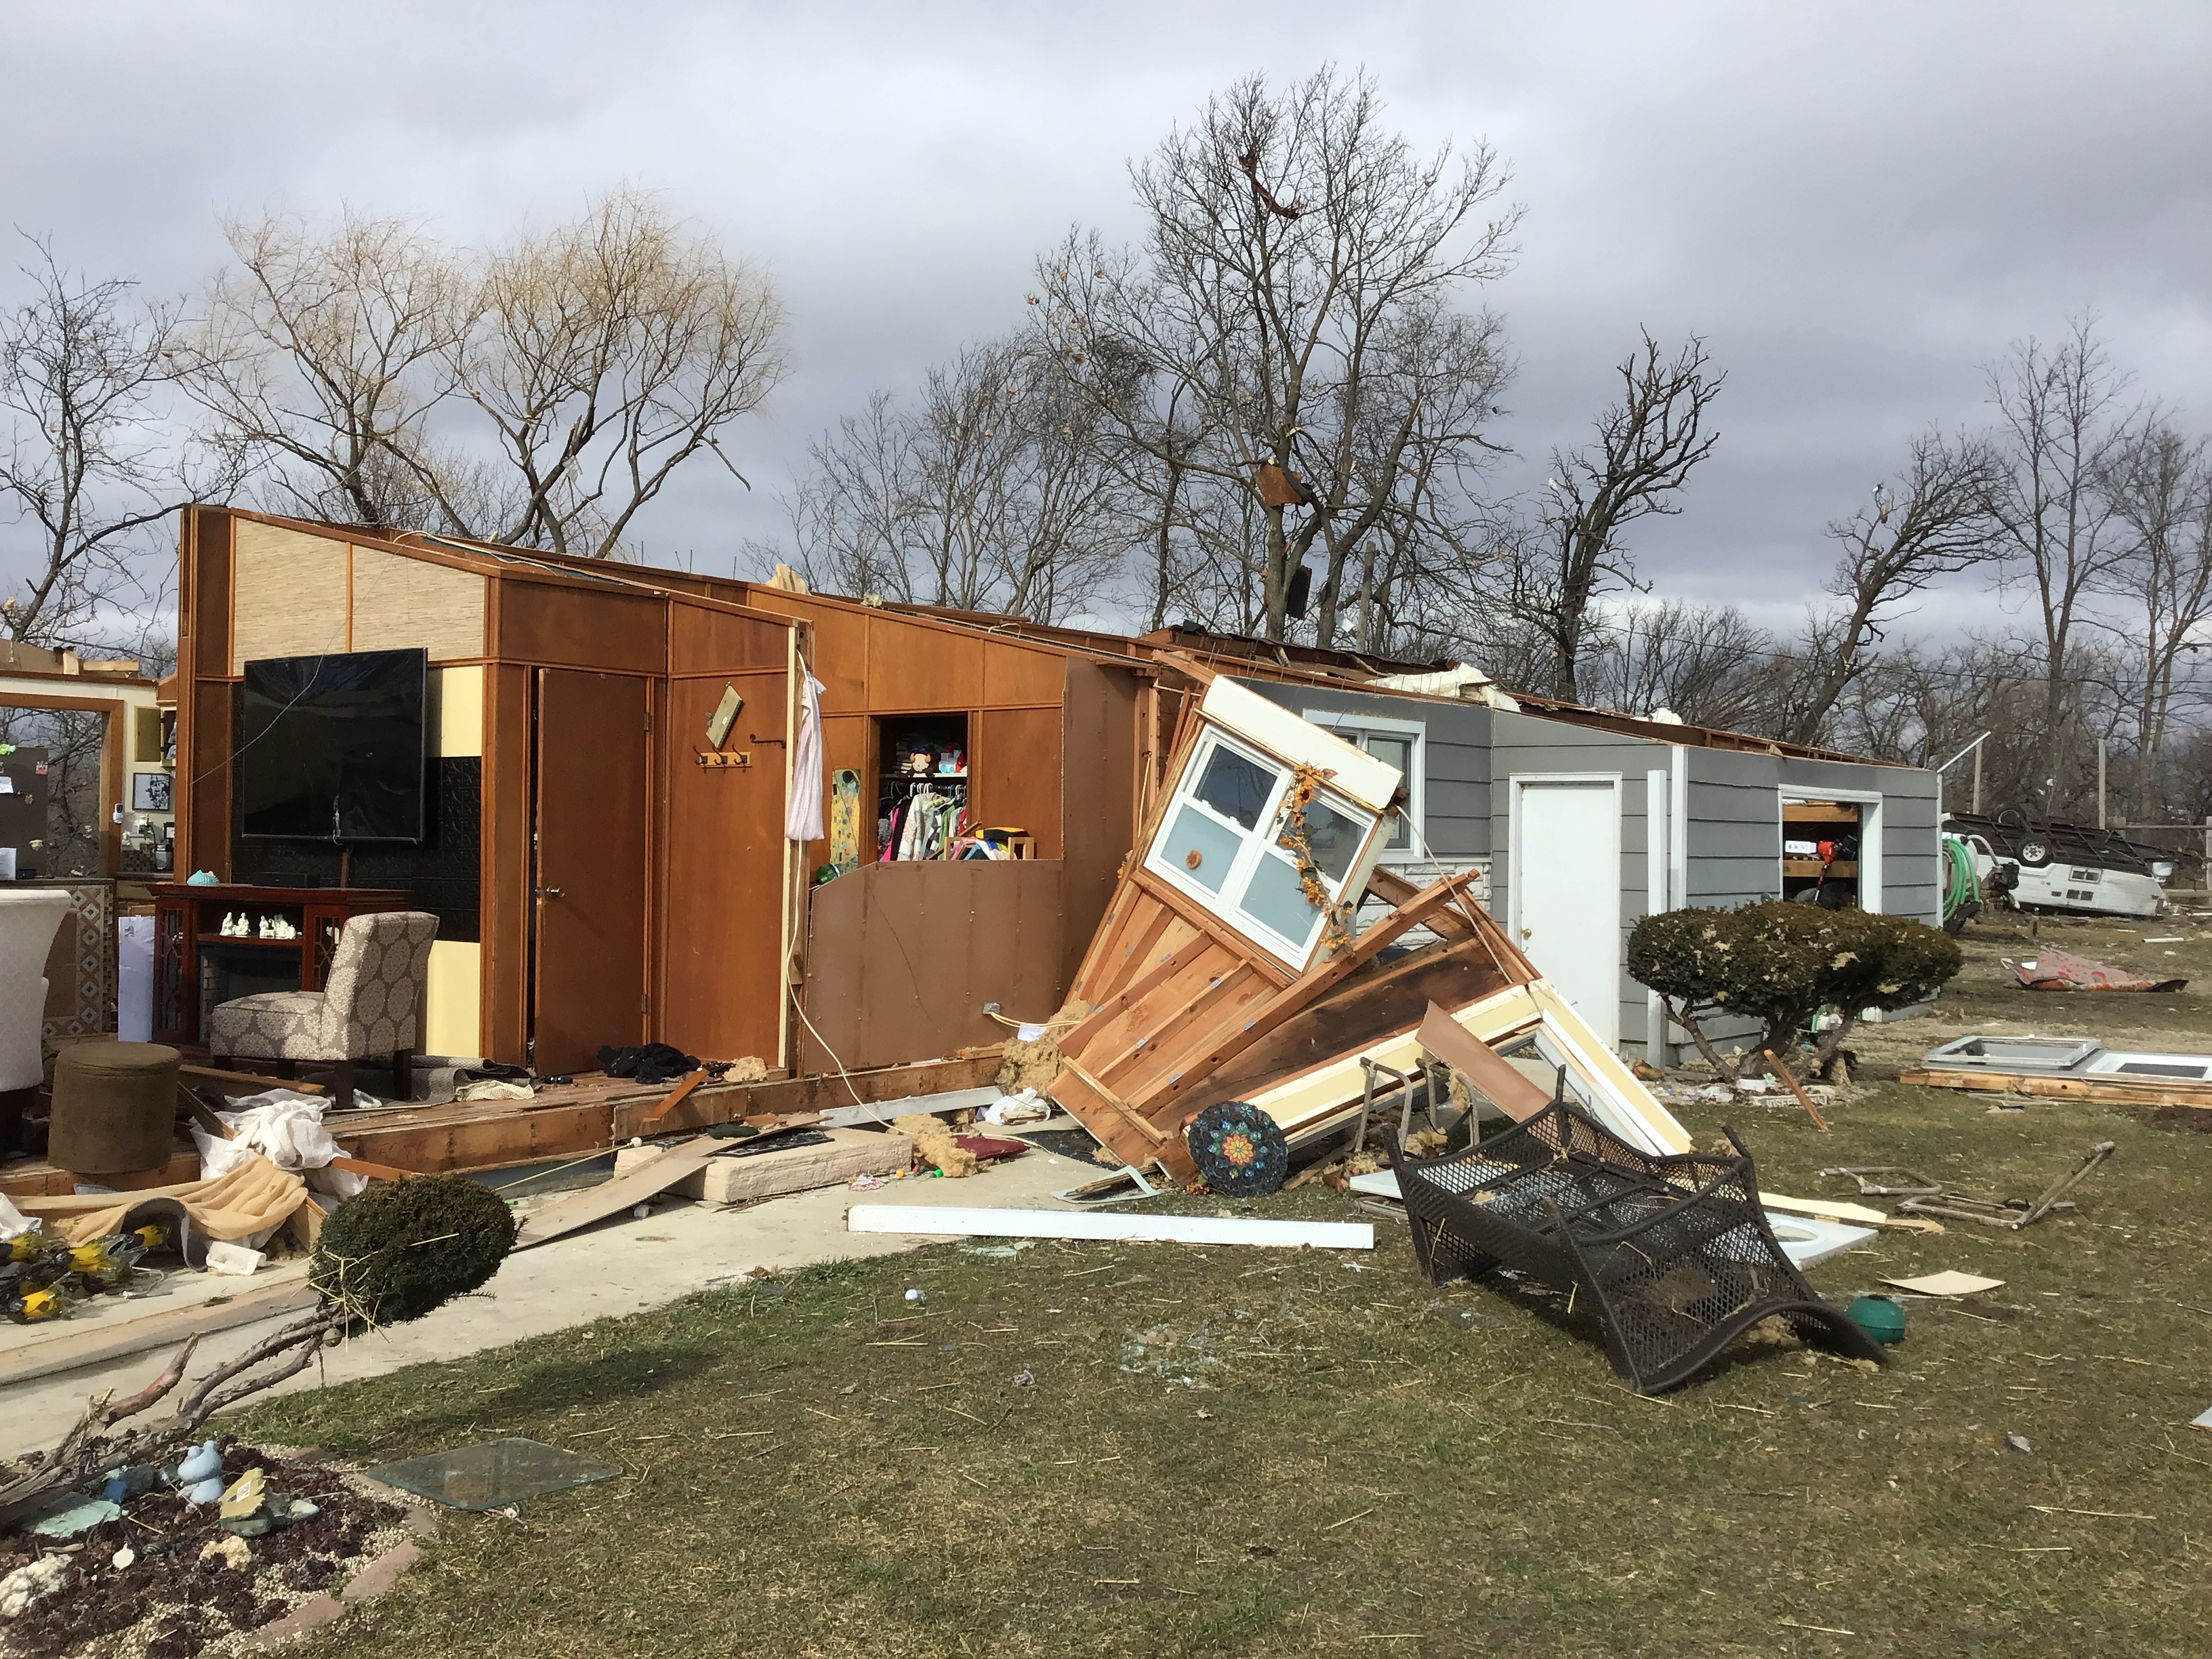 Storm damage to home, debris lofted into trees, trailer rolled